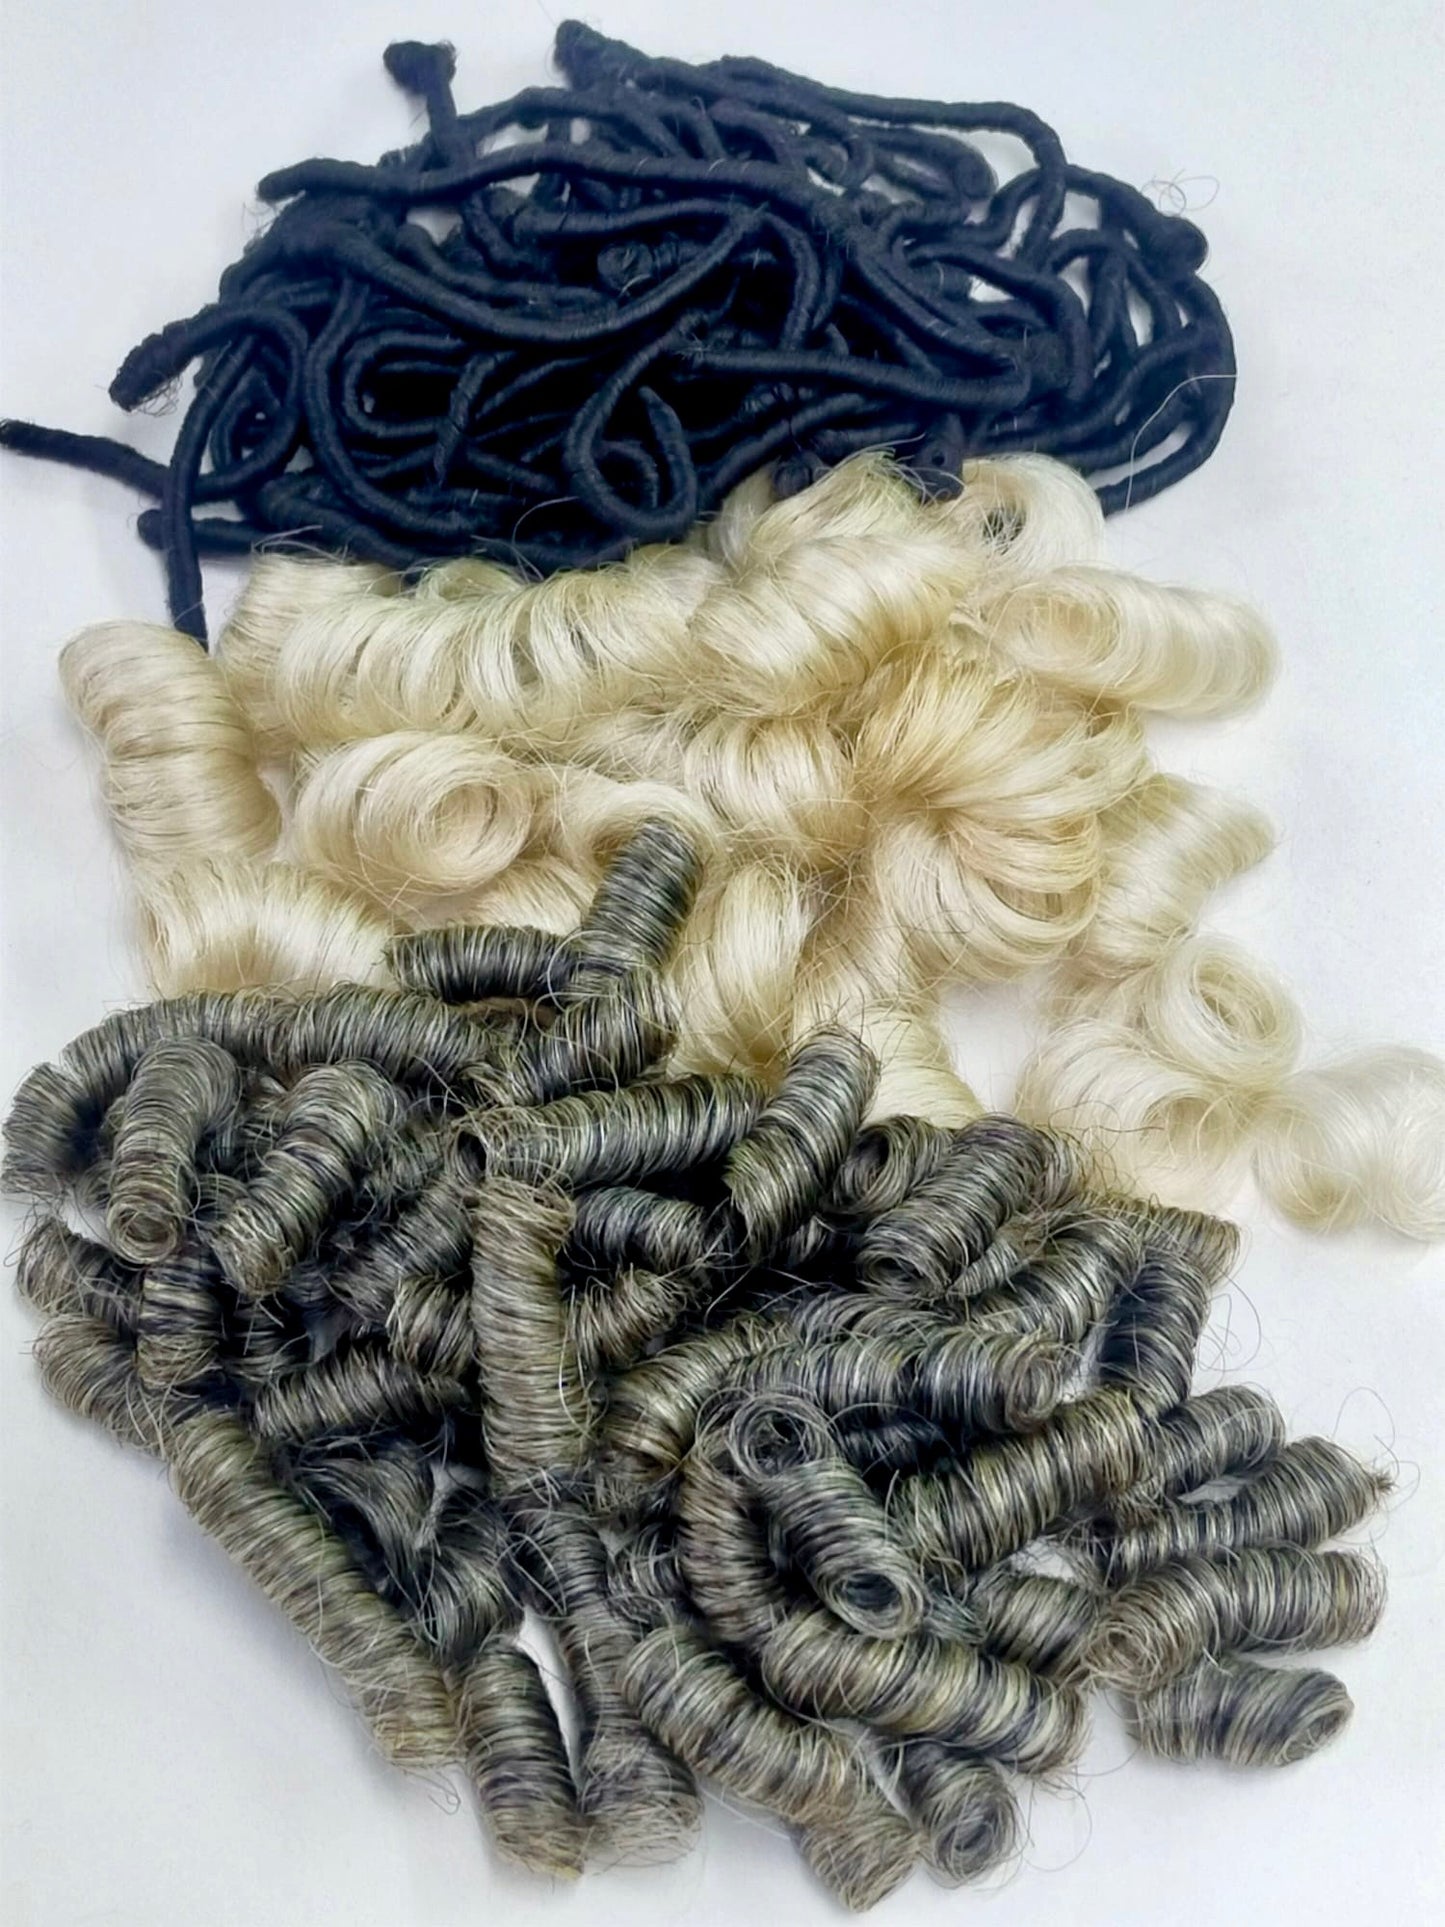 872. Natural White Permanently Curled Yak - Various Curl Sizes and Hair Lengths